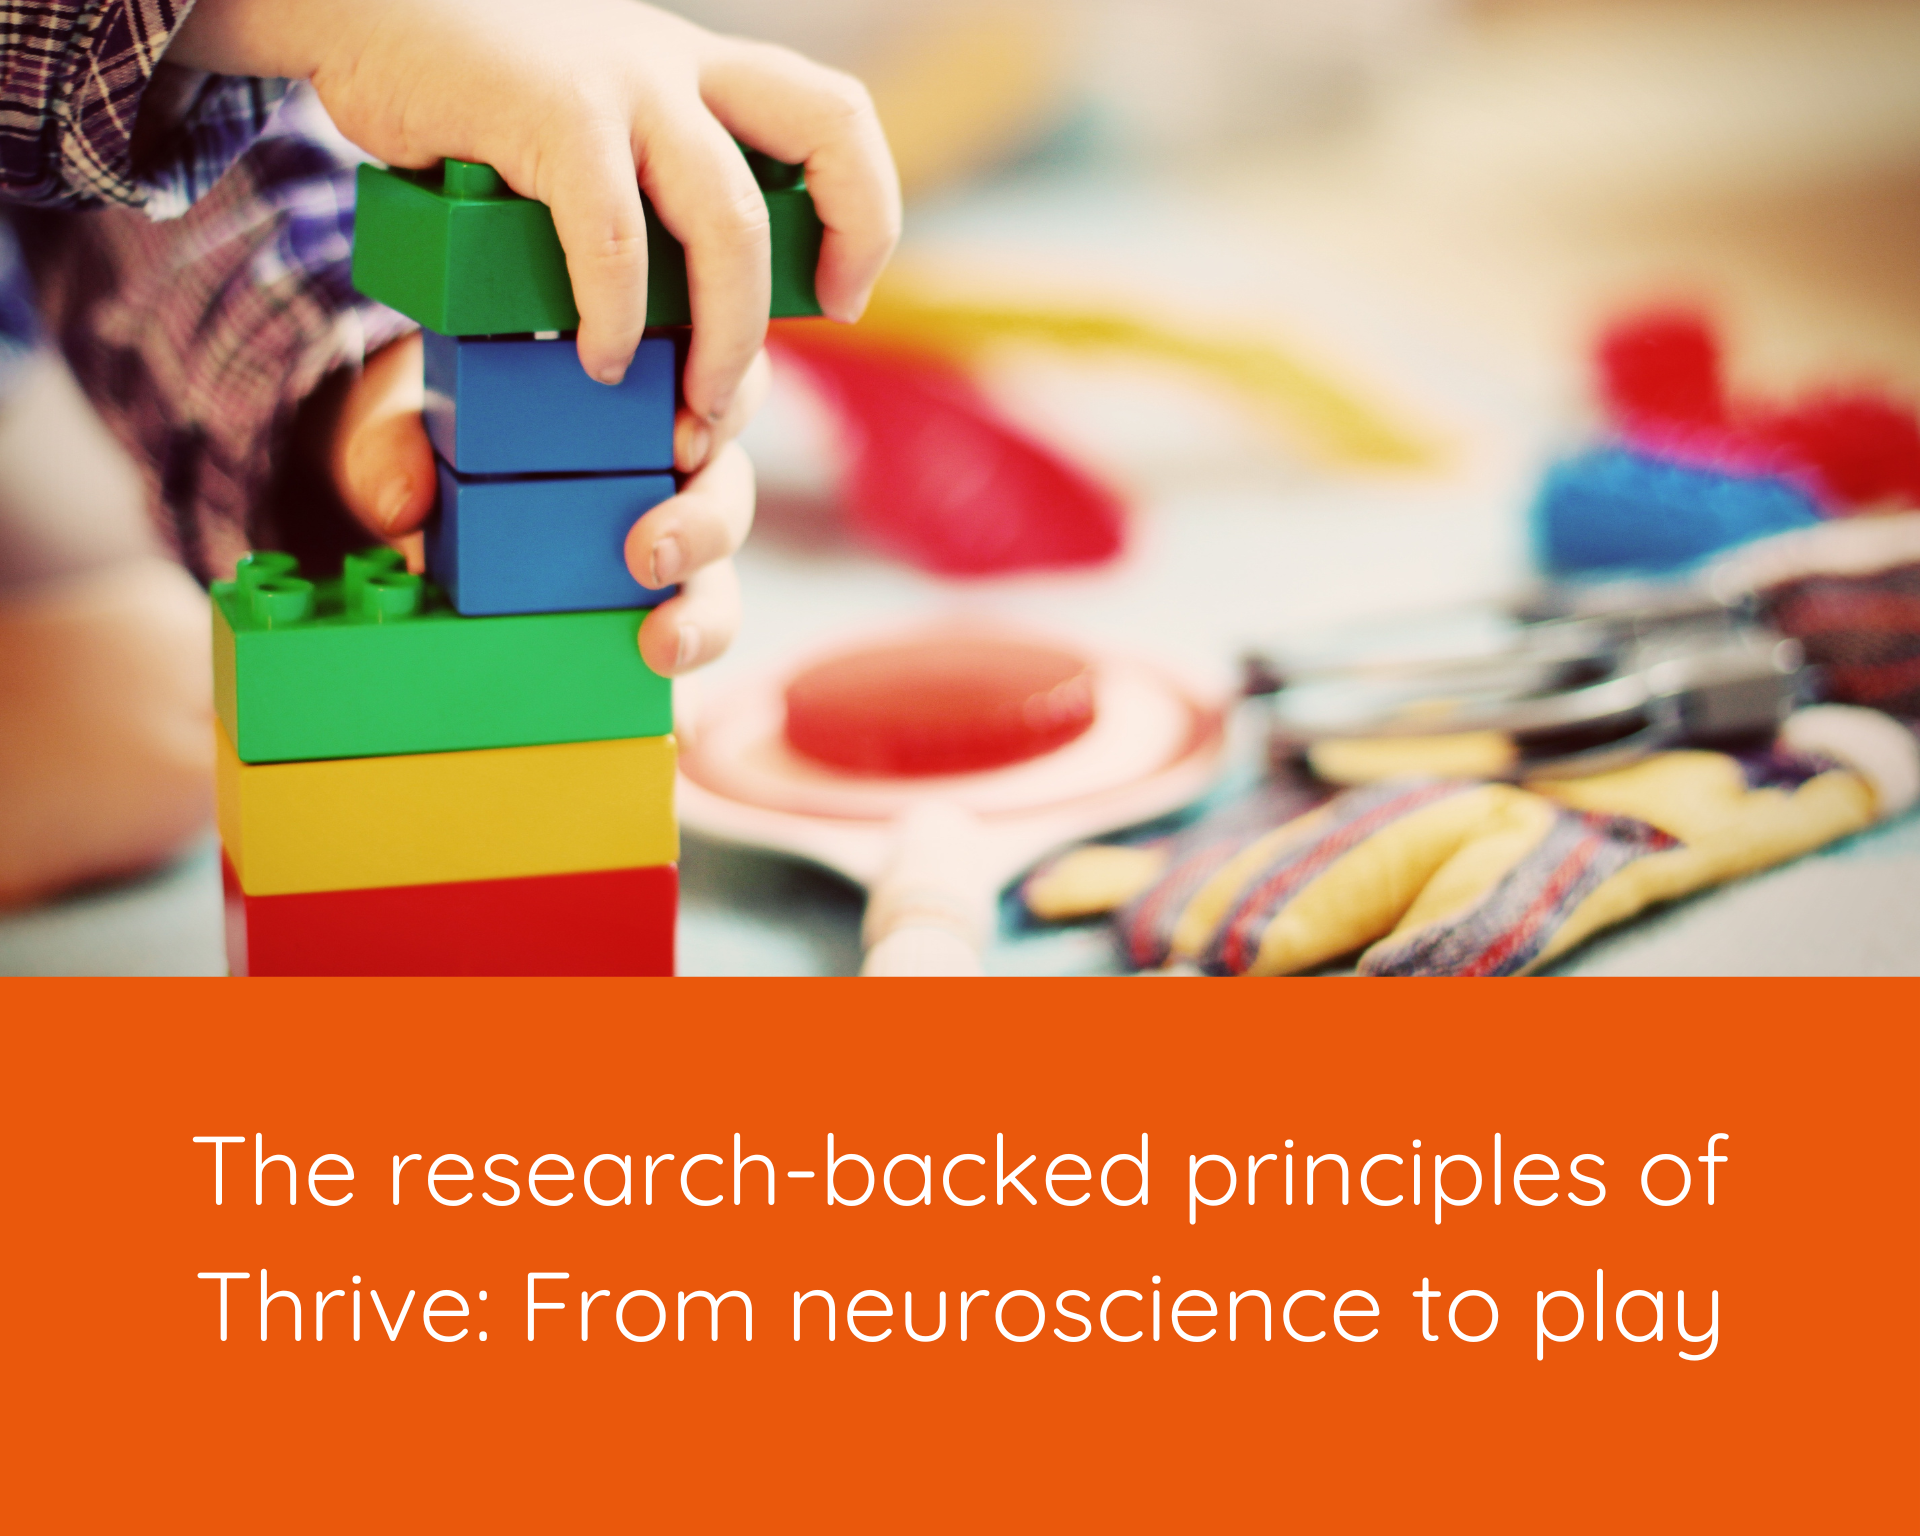 The research-backed principles of Thrive: From neuroscience to play